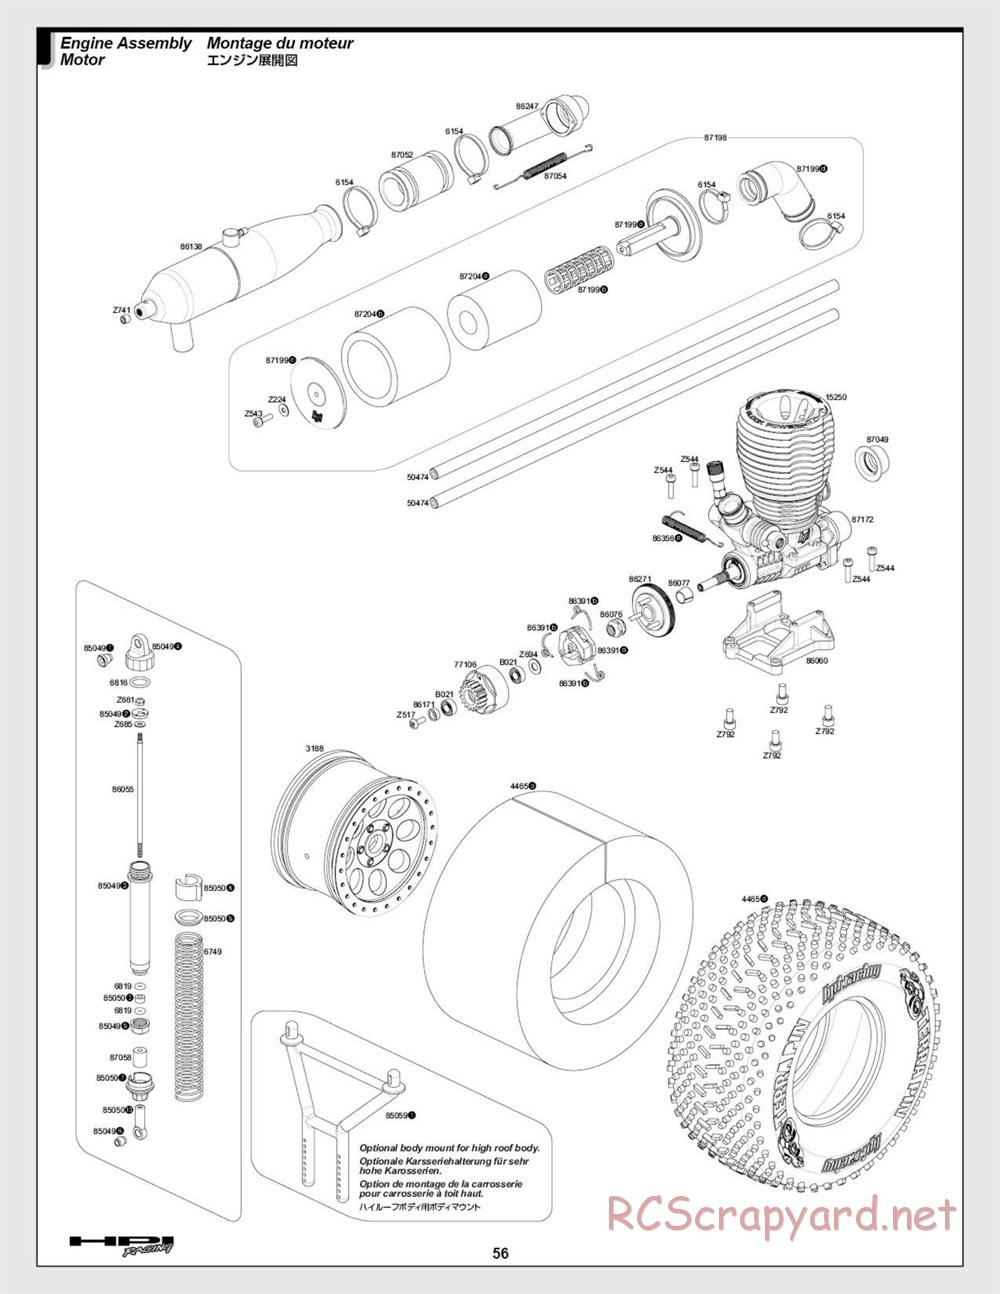 HPI - Savage XL 5.9 - Exploded View - Page 56